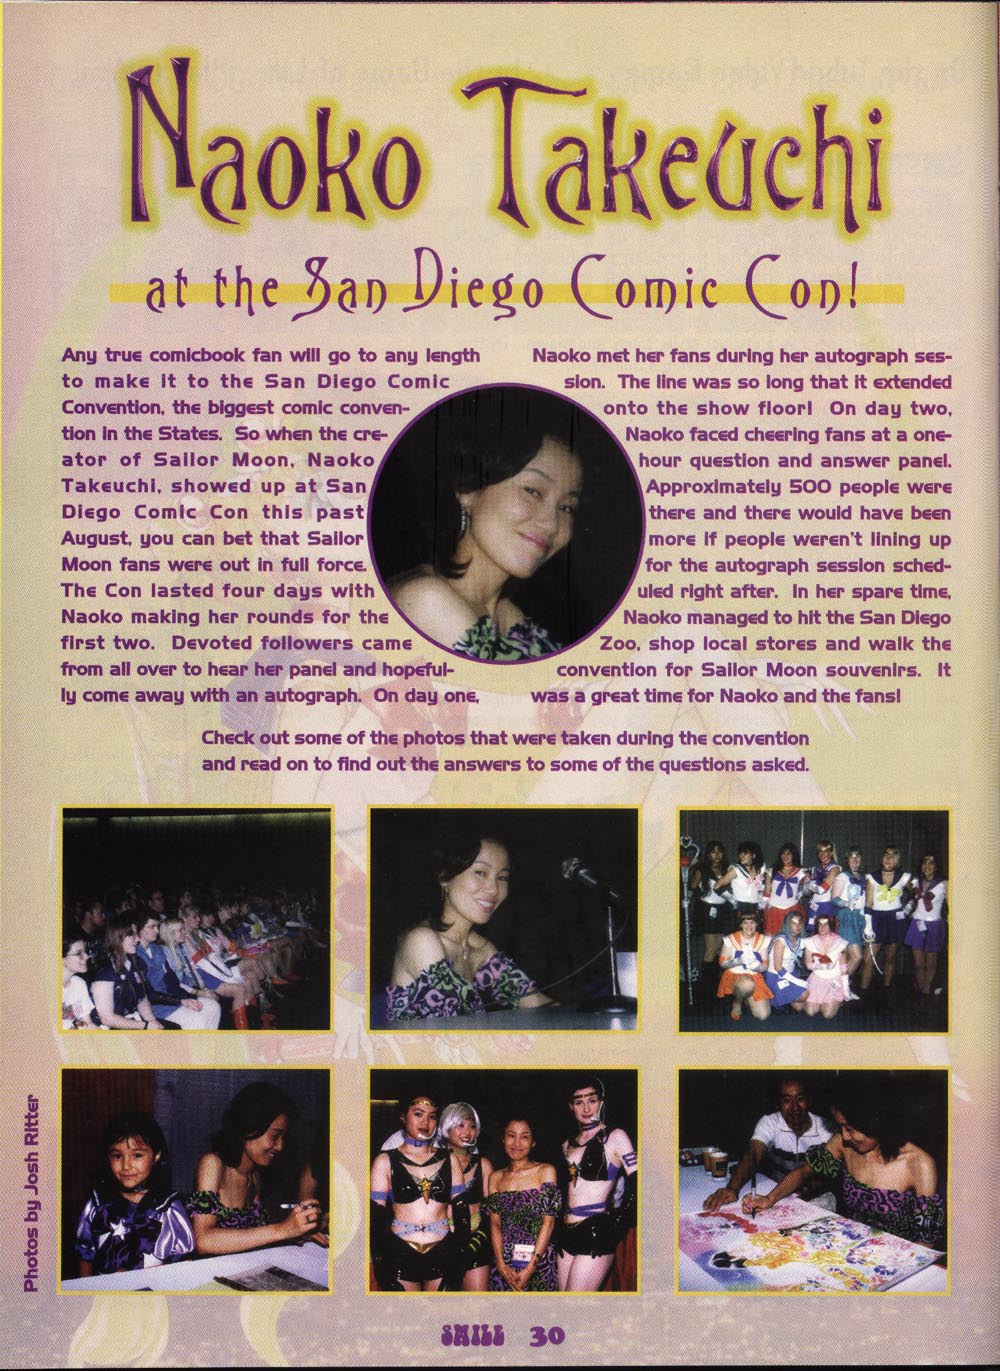 Interview with Naoko Takeuchi from Smile Magazine, December 1998